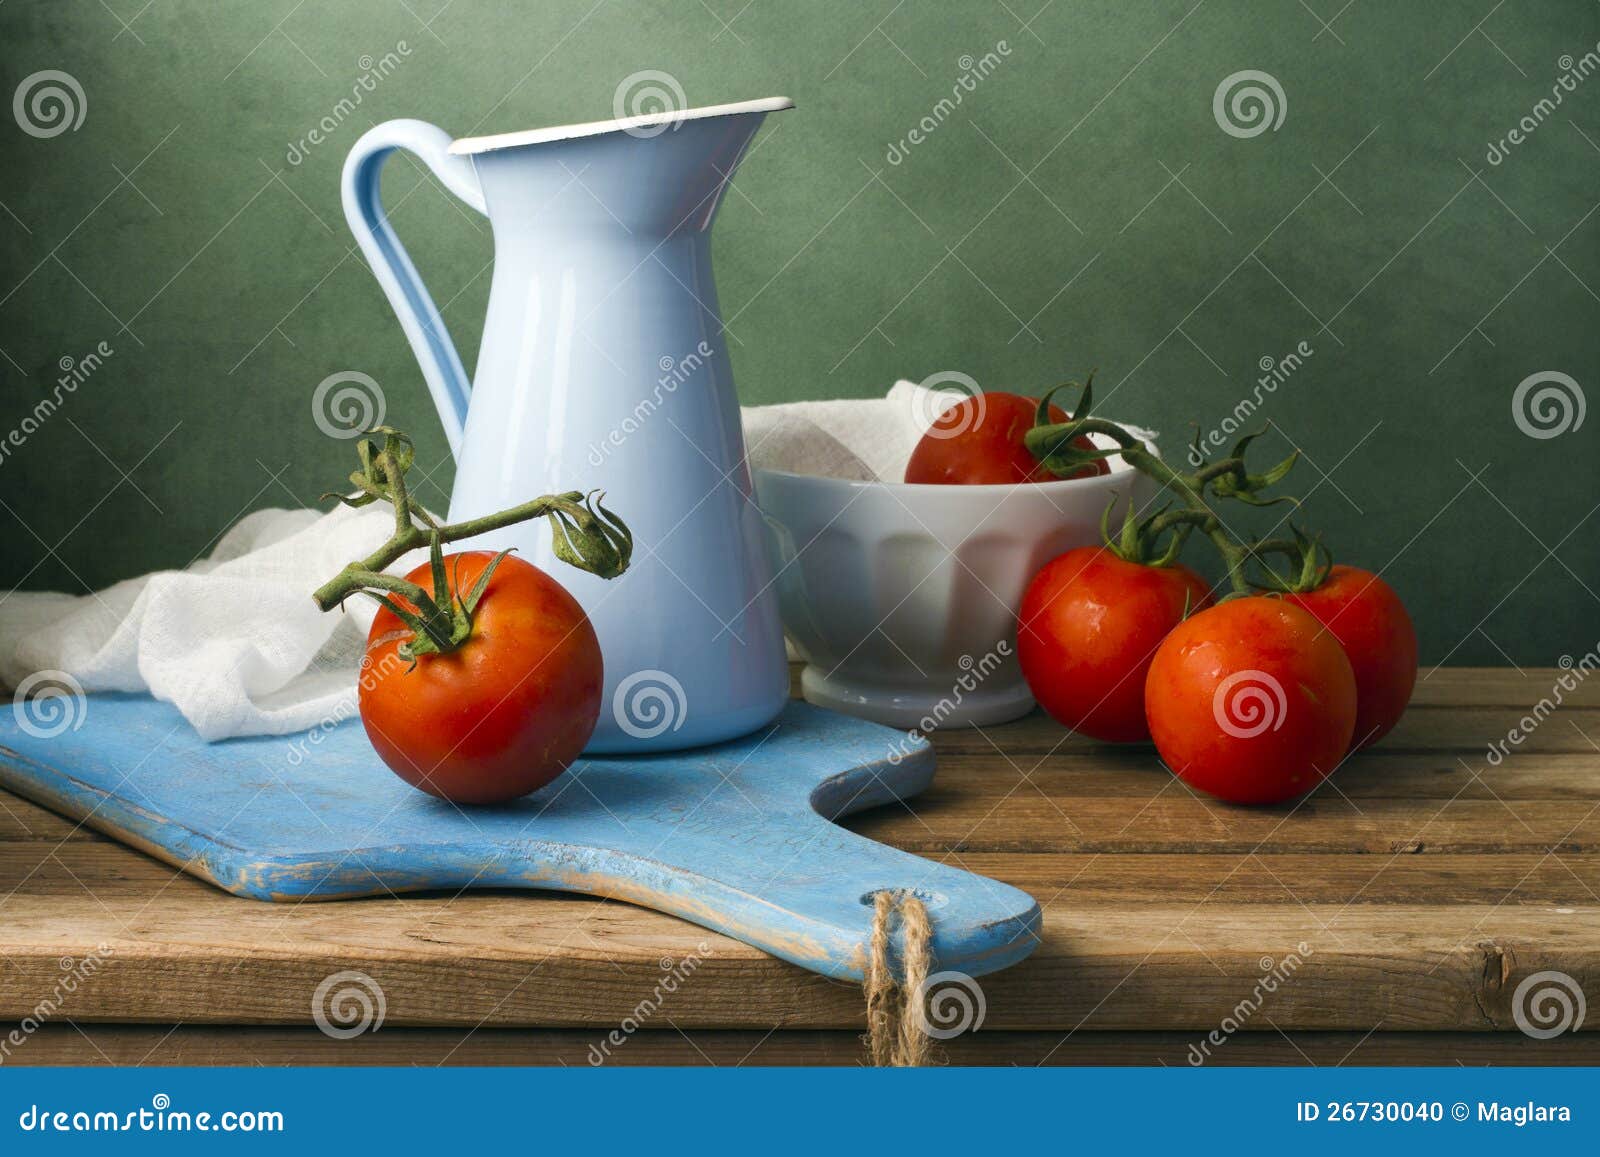 still life with tomatoes and enamel jug